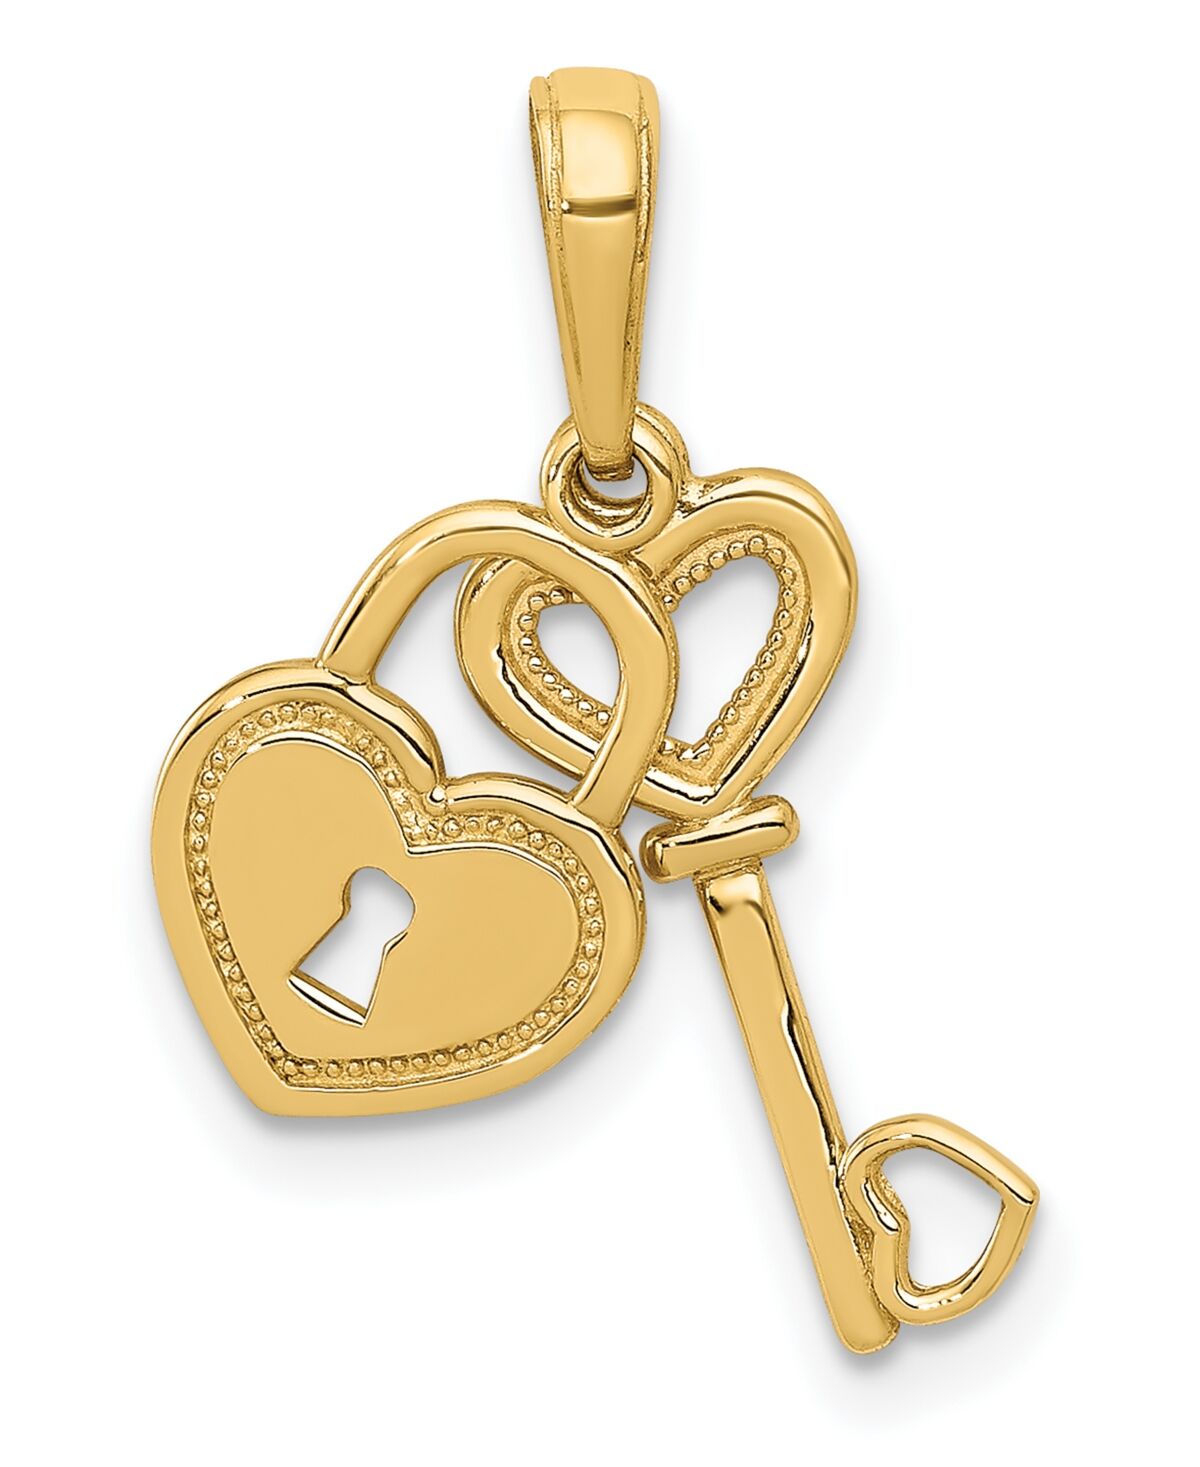 Macy's Key and Heart Shaped Lock Pendant in 14k Yellow Gold - Gold